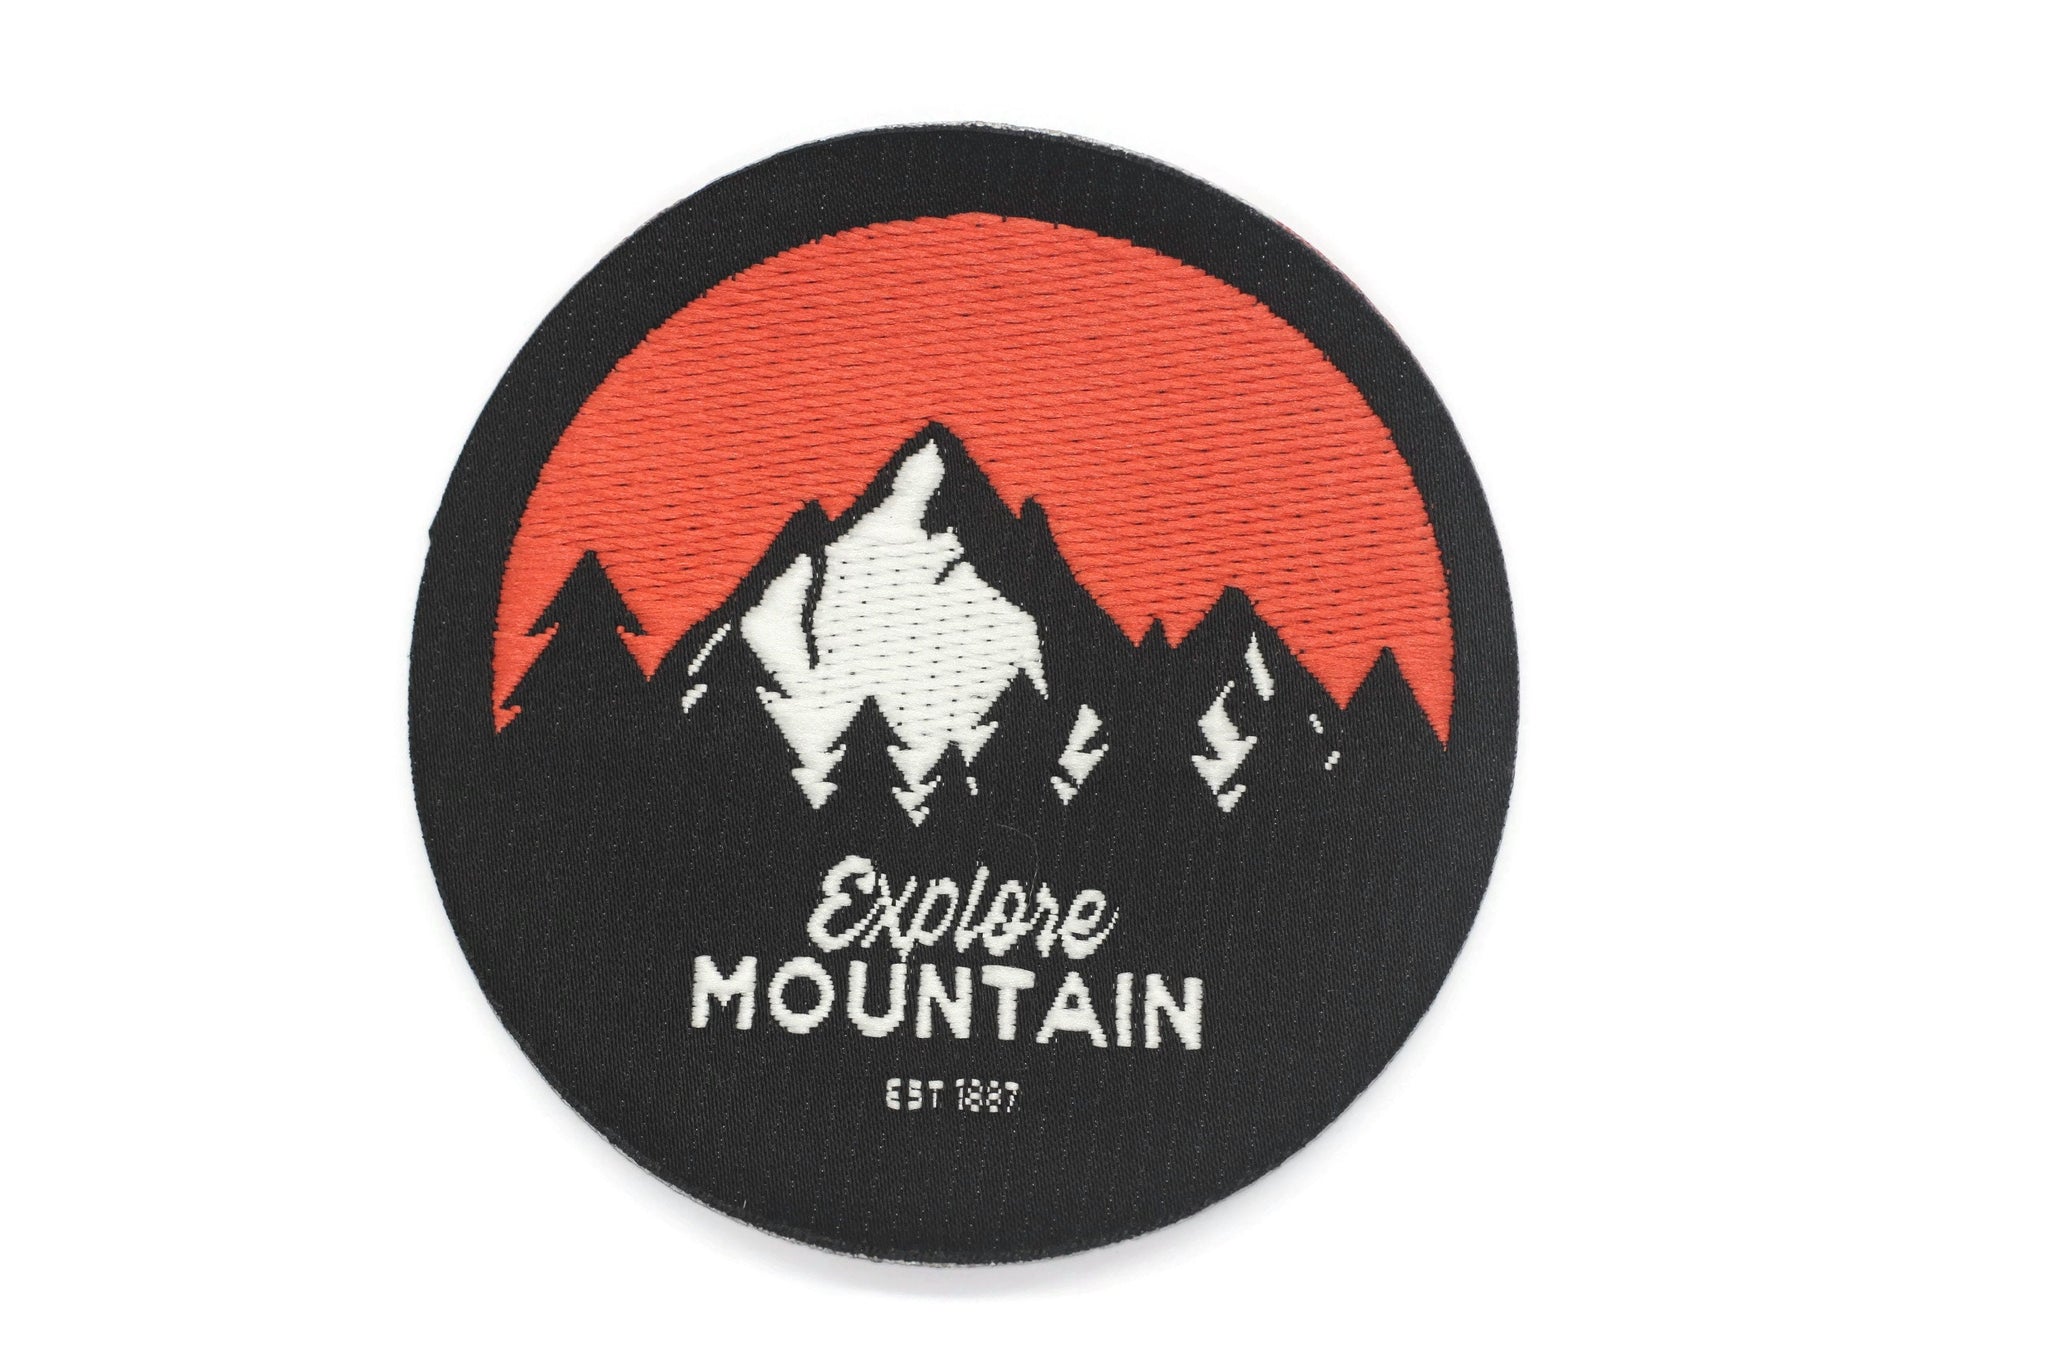 10 Pcs Mountain Patch 2.4 Inch Iron On Patch Embroidery, Custom Patch, High Quality Sew On Badge for Denim, Sew On Patch, Applique